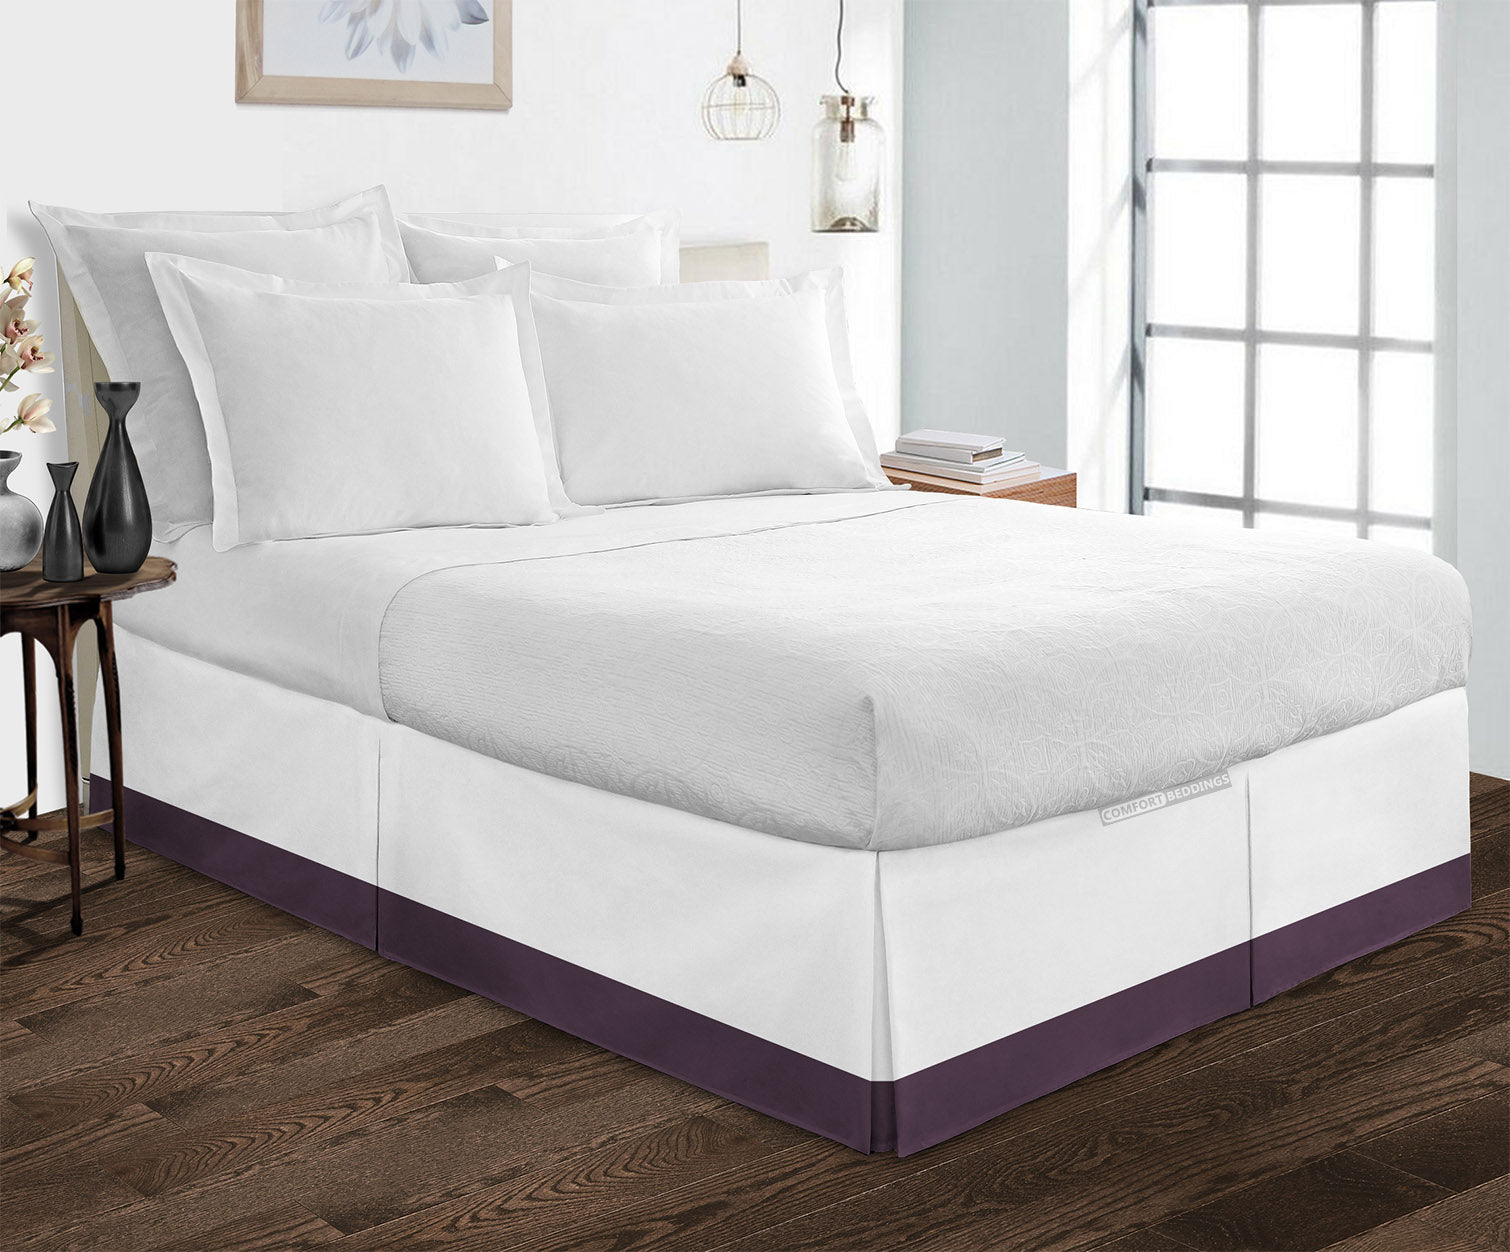 600TC Plum two tone bed skirt